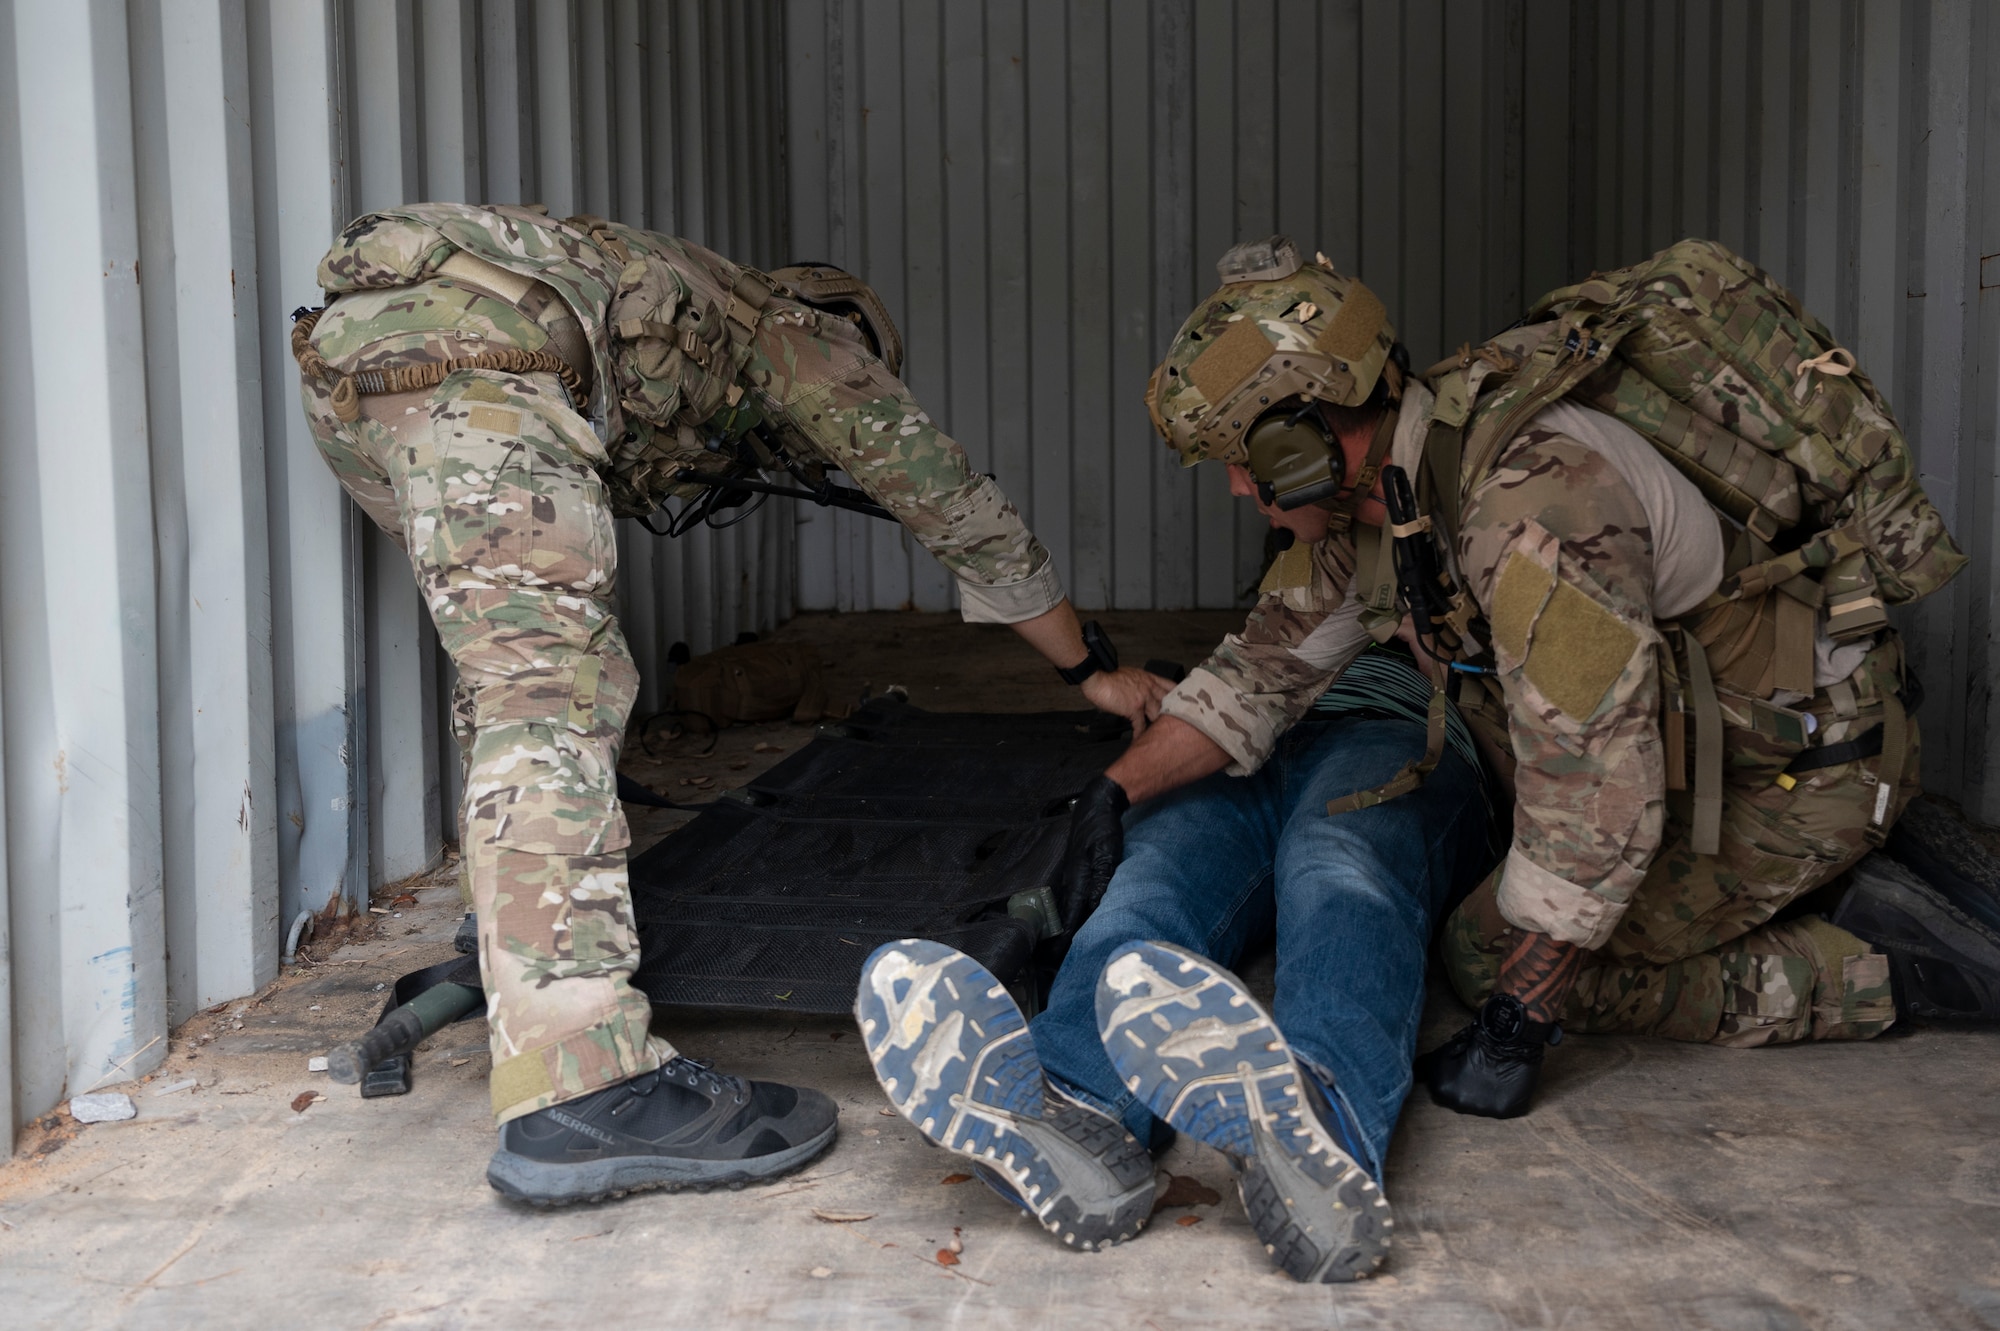 We look at the bottoms of the shoes of a patient as he is flanked by two Special Tactics Operators working as a team to move the injured patient onto a stretcher.